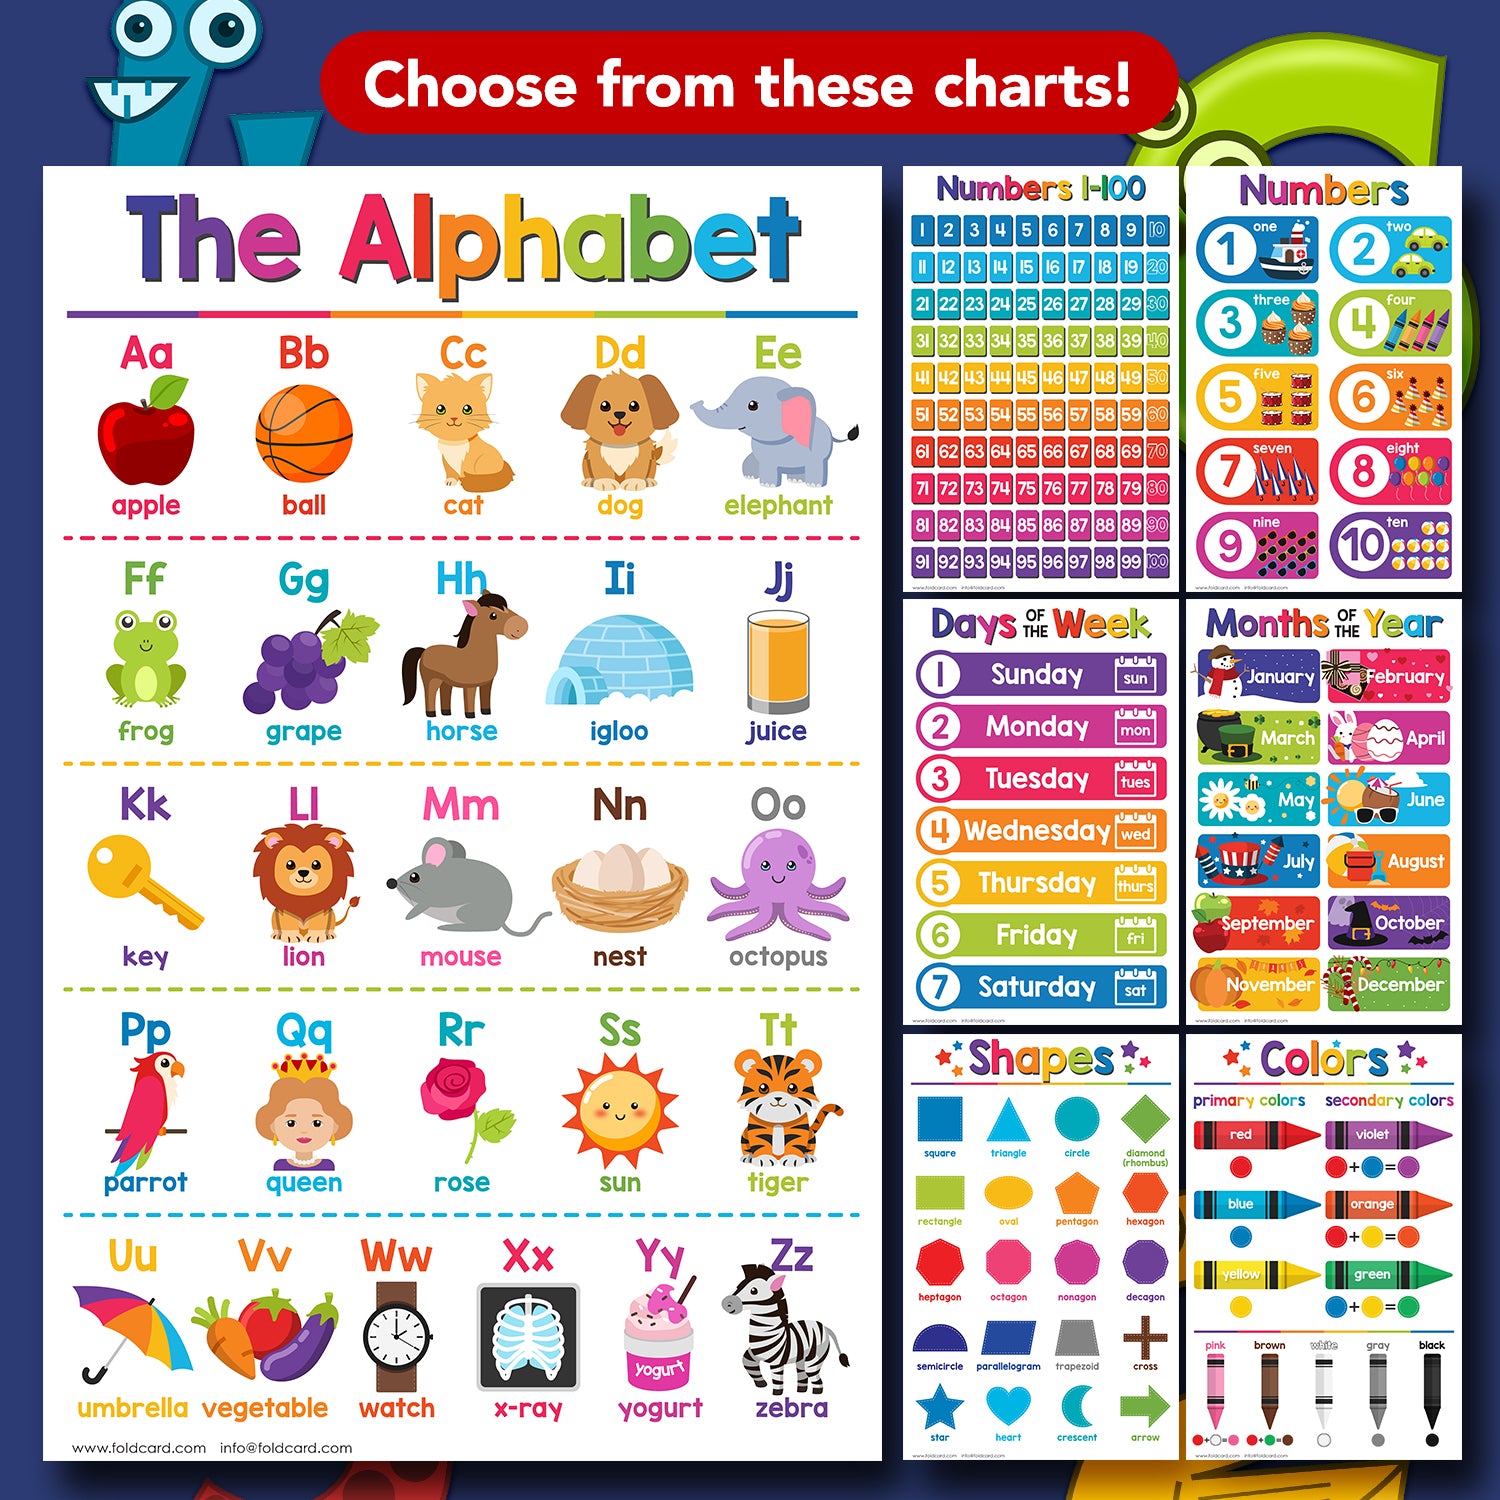 Numbers 1-100 Chart for Kids - Bright Educational Visual | 11" x 17" | 5-Pack